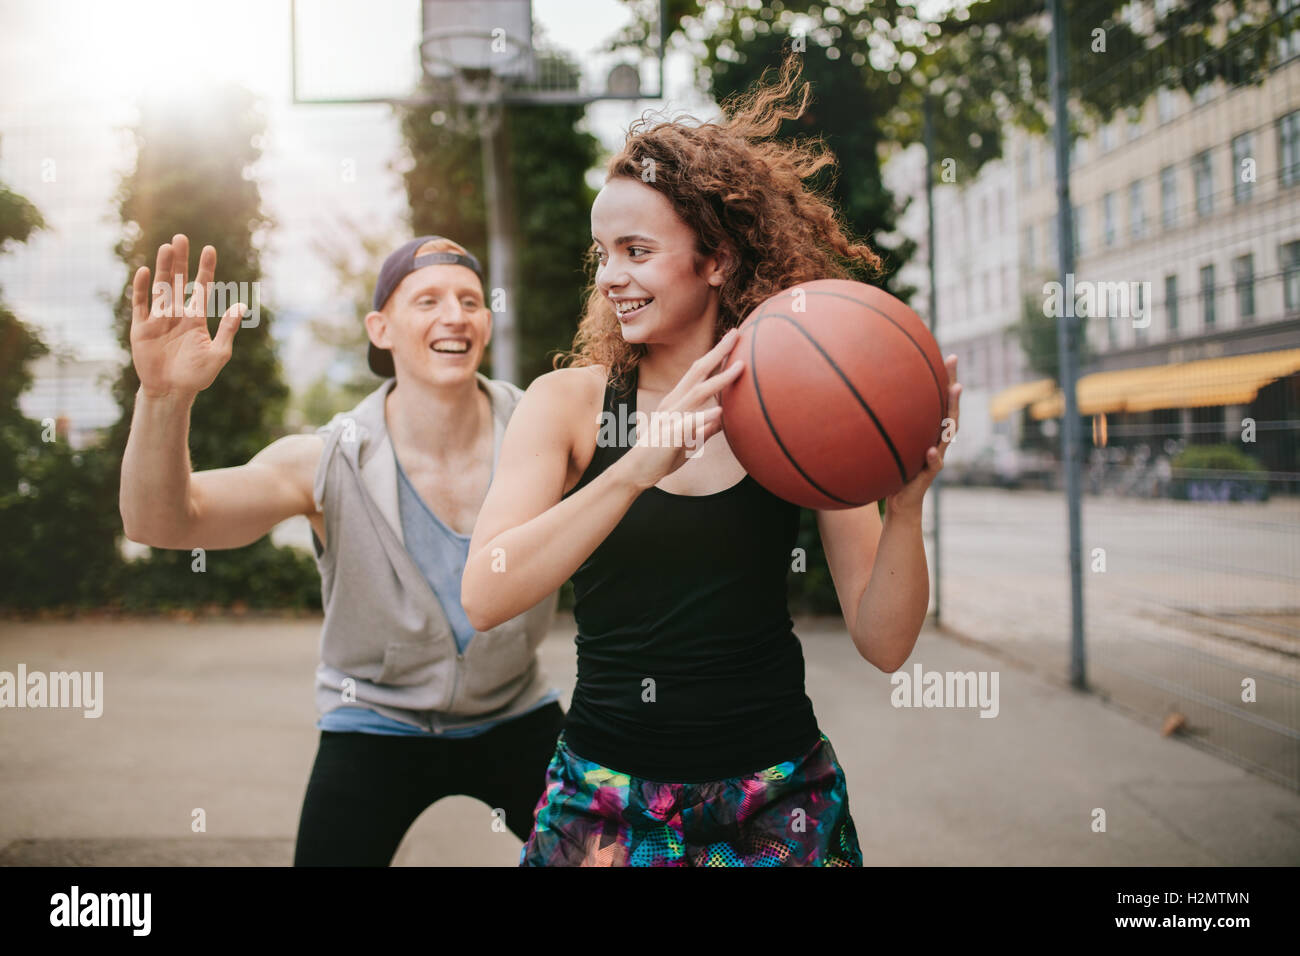 Young girl playing basketball with boy blocking. Teenage friends enjoying a game of streetball on outdoor court. Stock Photo